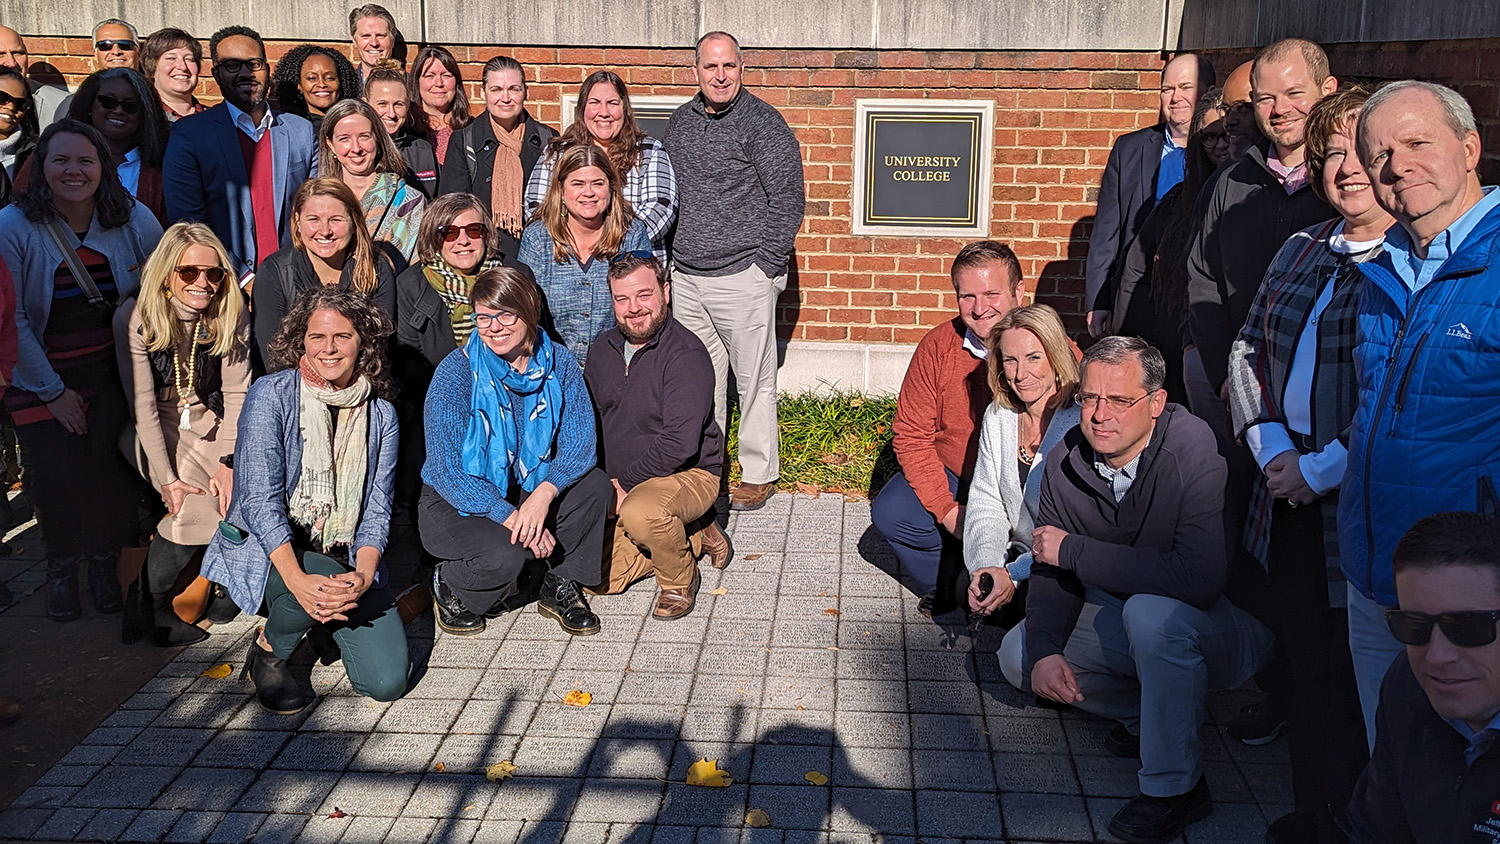 Faculty and staff from the Division of Academic and Student Affairs gather around the new University College Plaque at the Dorothy and Roy Park Alumni Center on Centennial Campus.